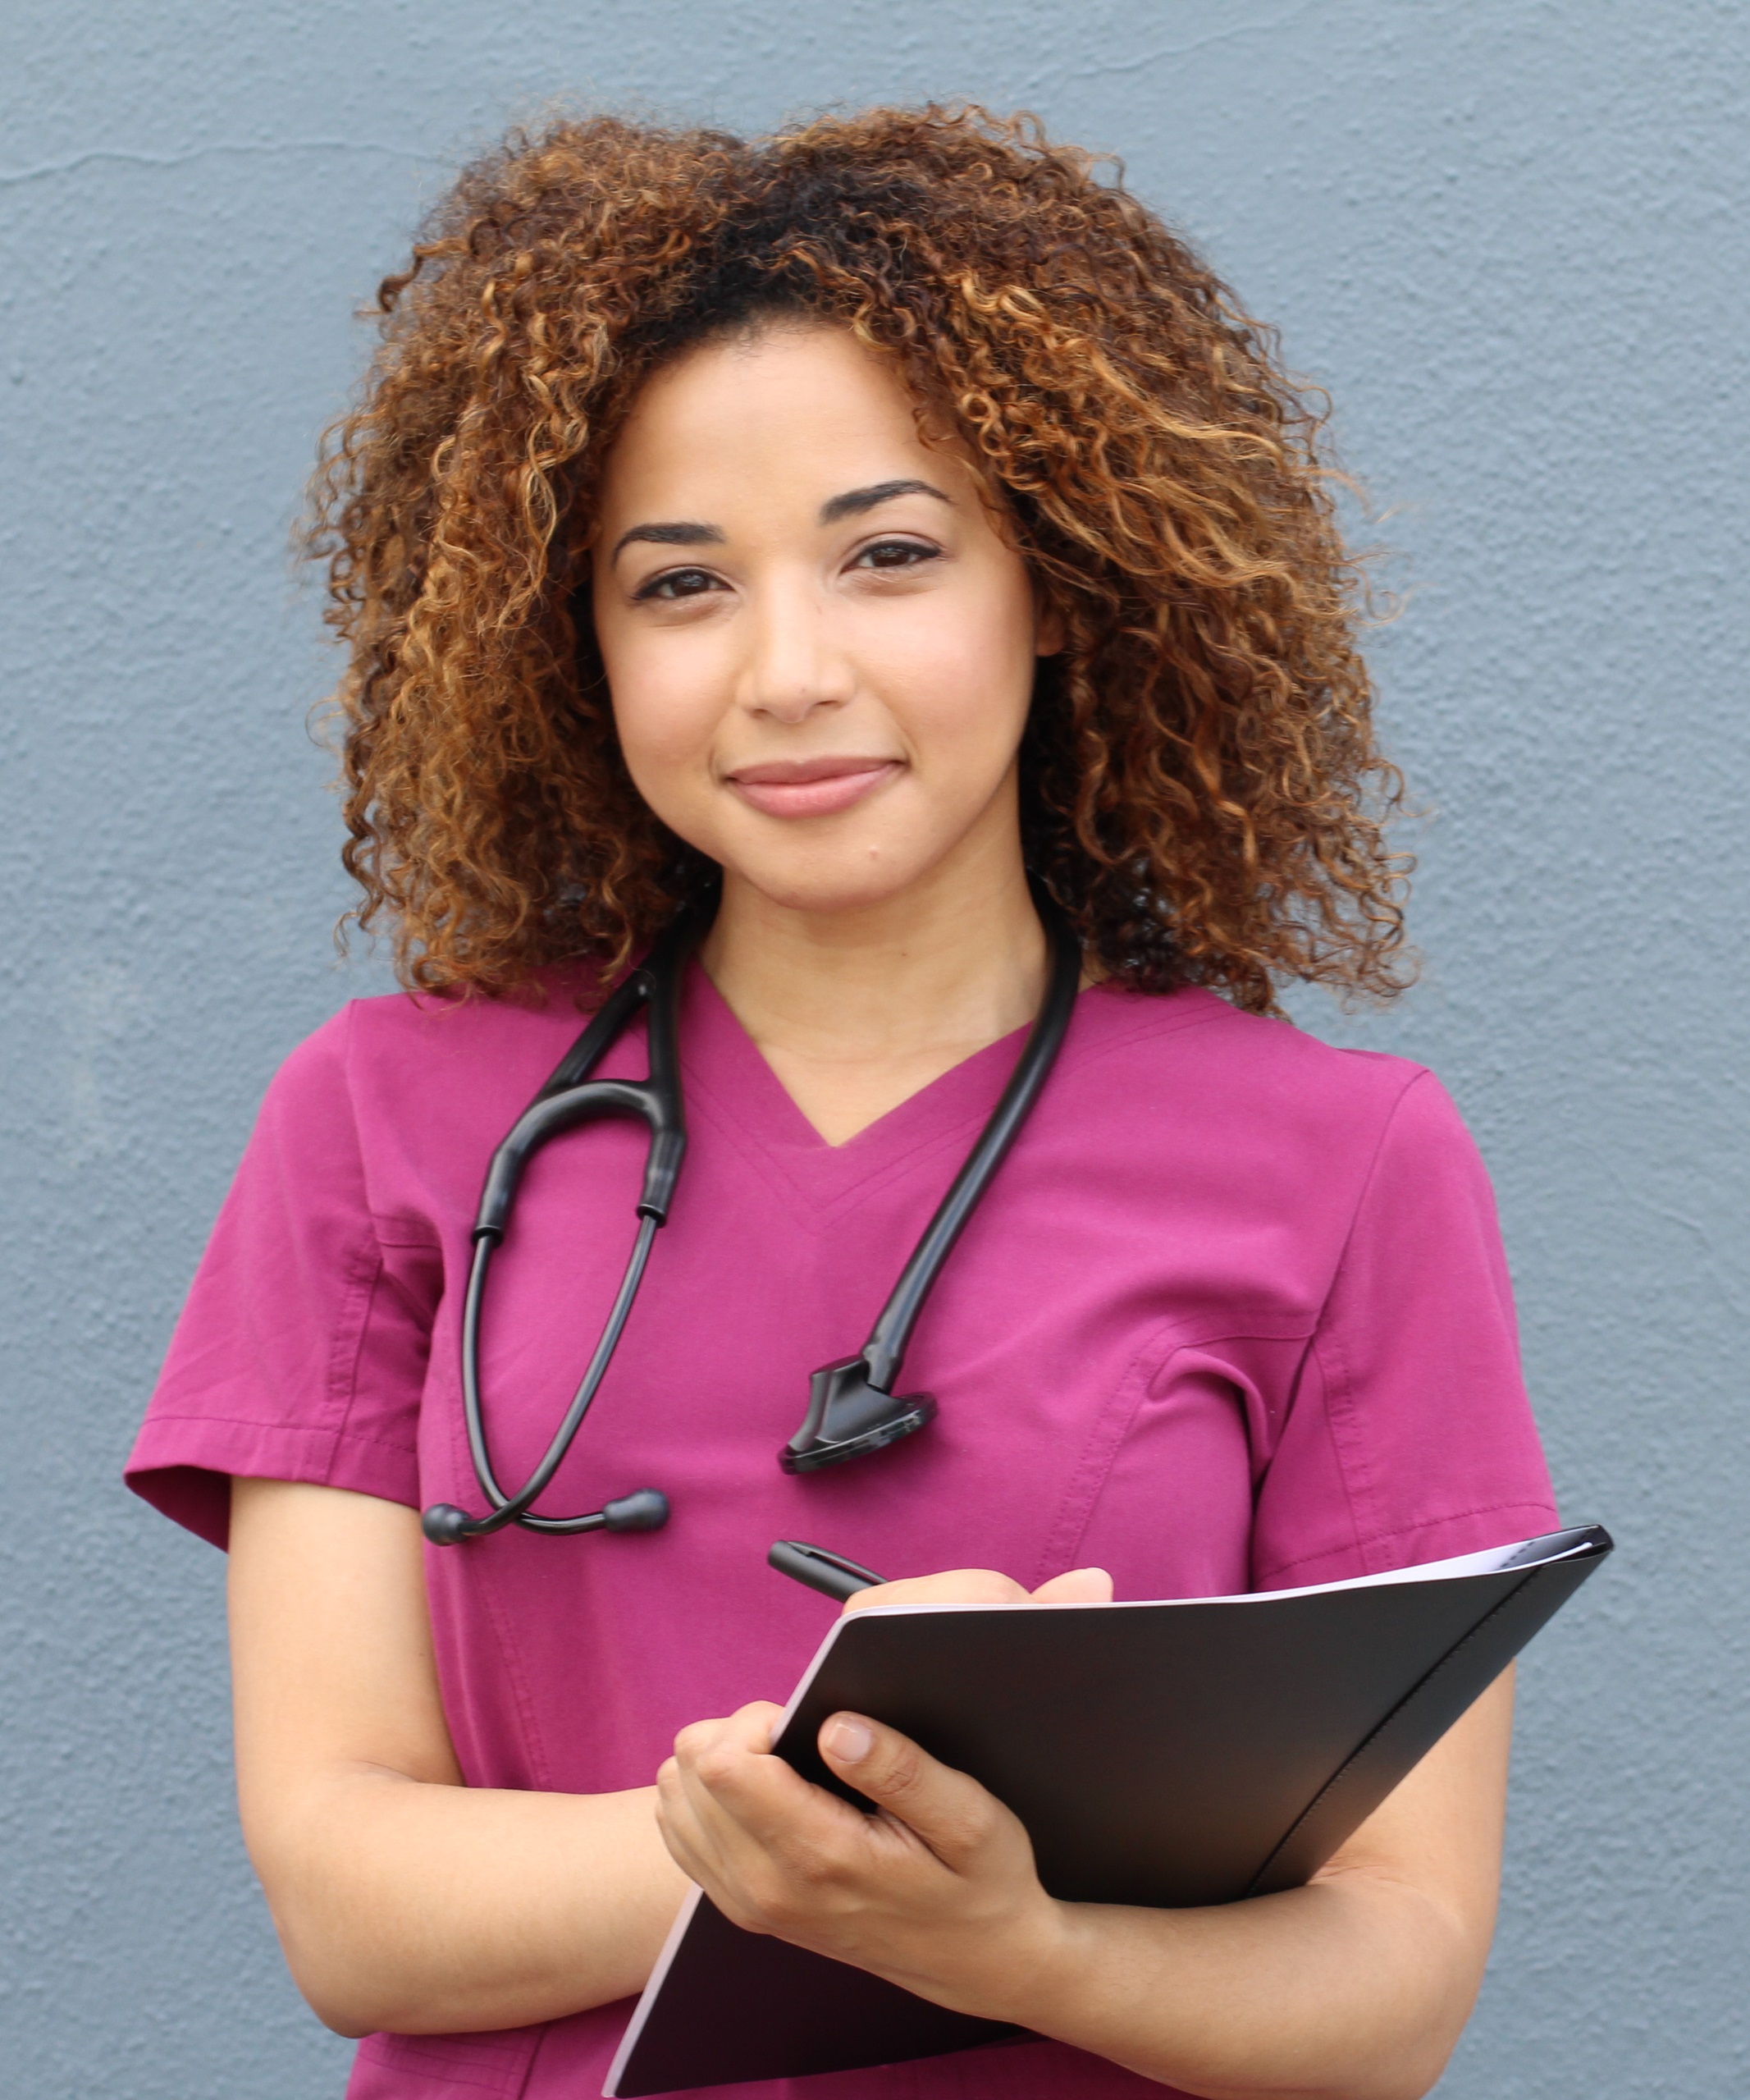 female medical professional in front of a blank wall